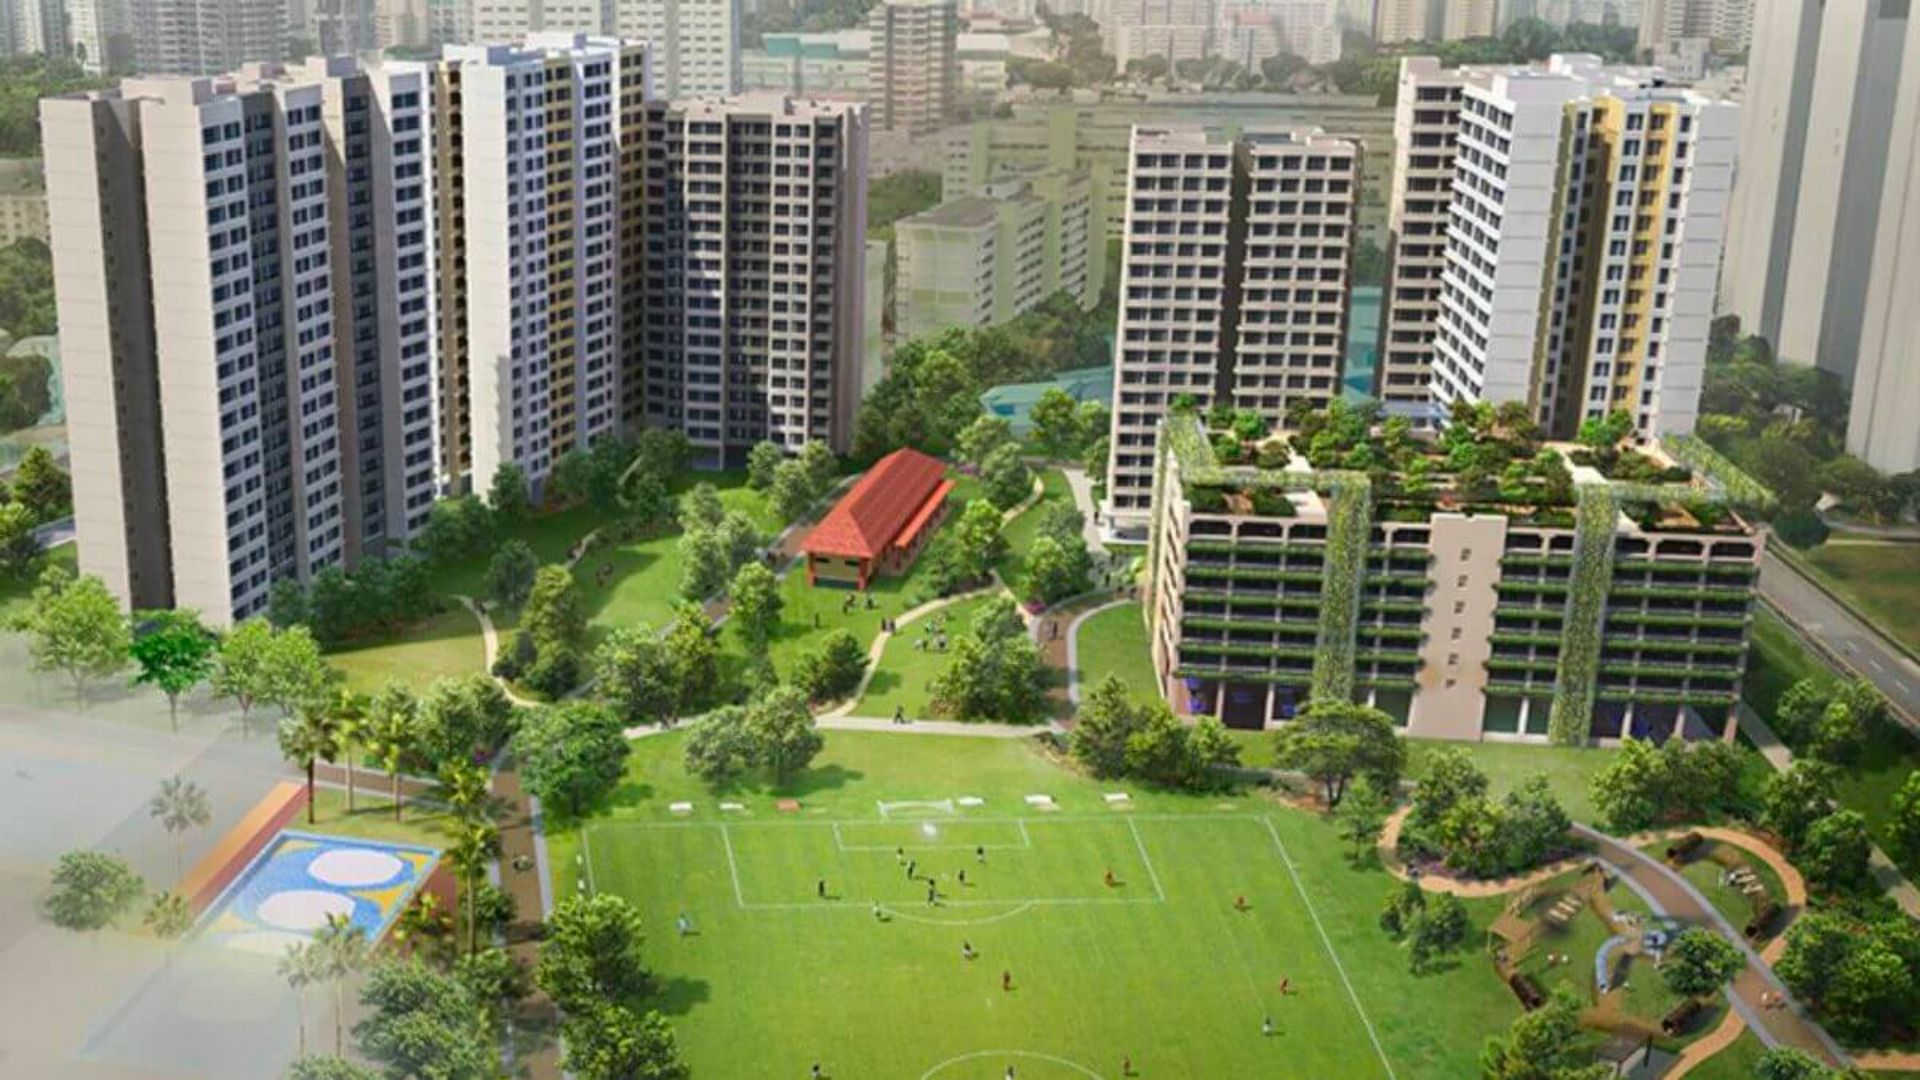 HDB BTO flats are not priced for profits